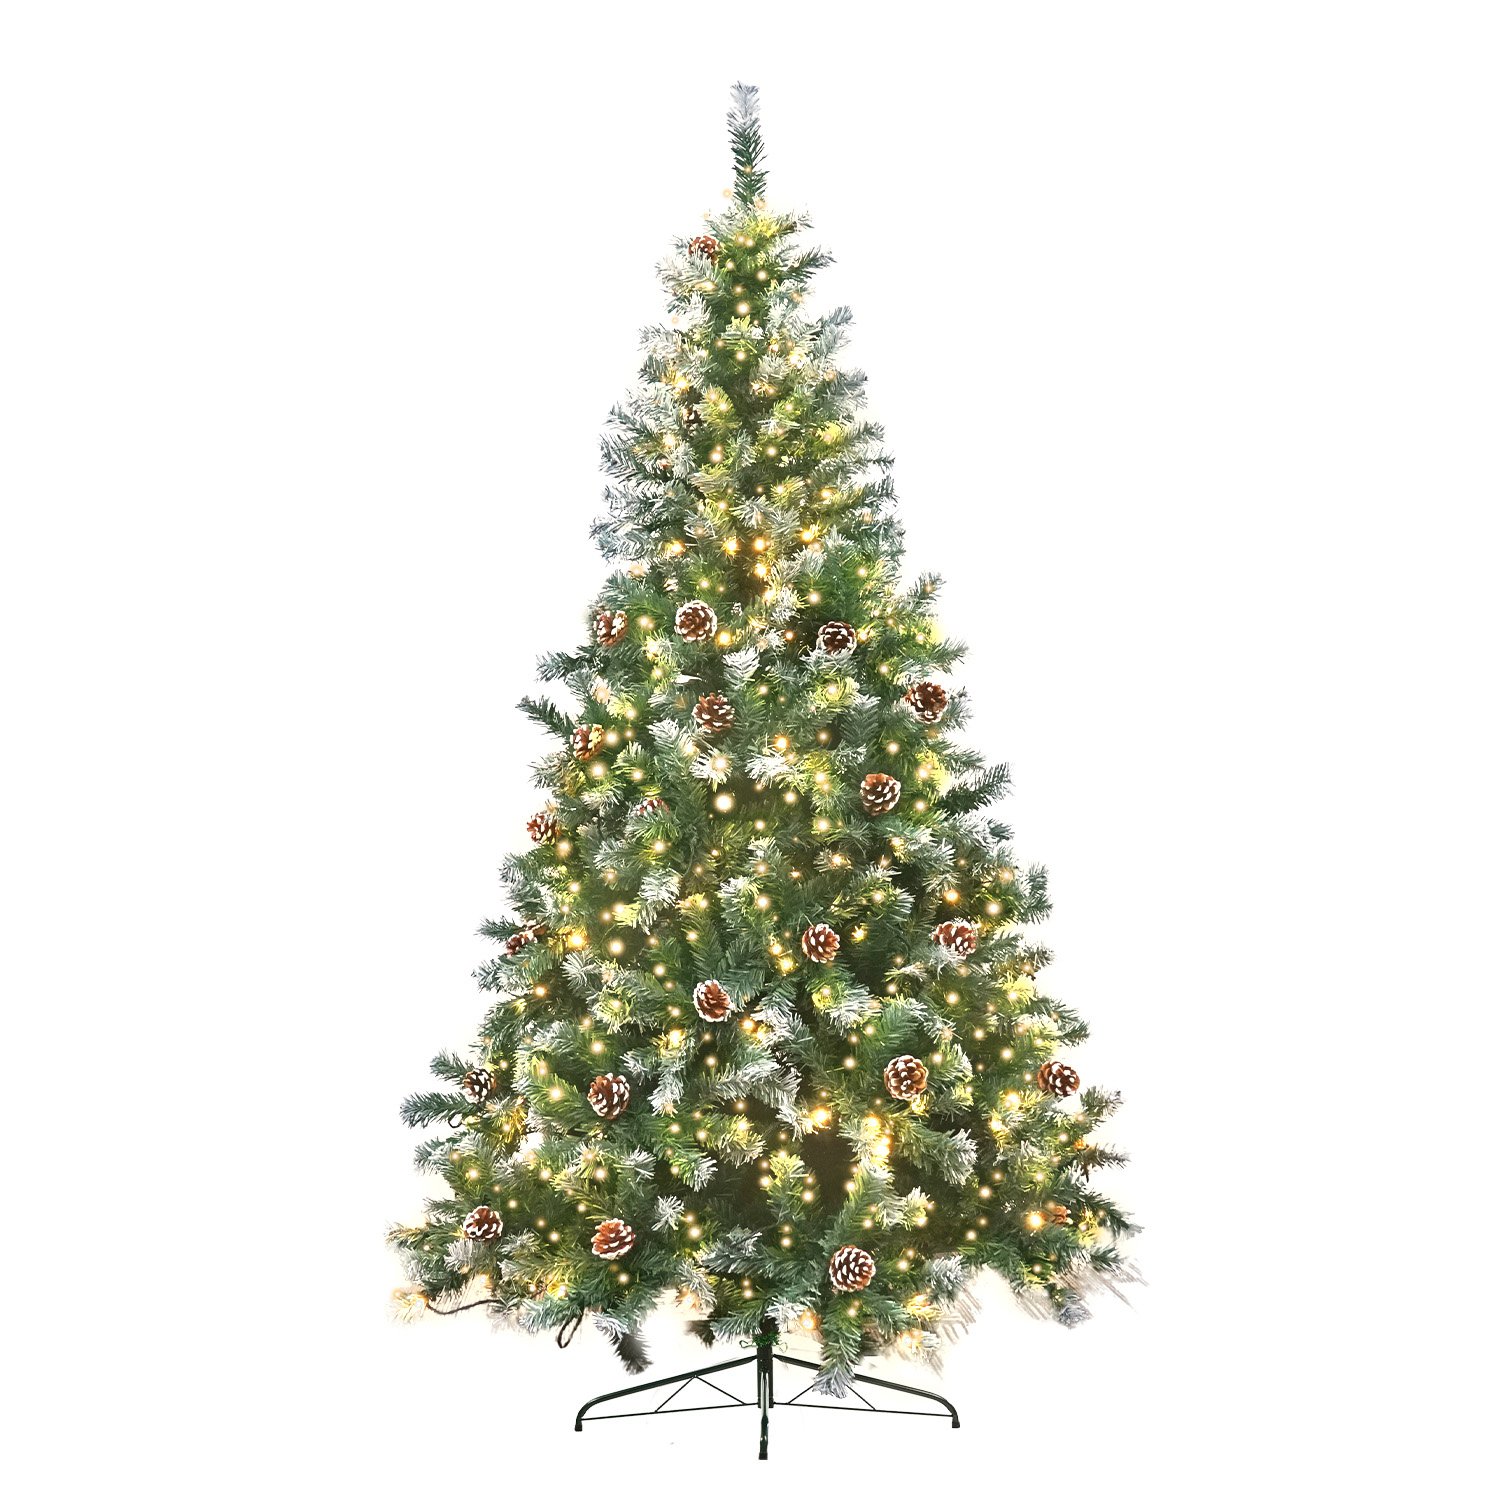 Christabelle 1.5m Pre Lit LED Christmas Tree with Pine Cones 1